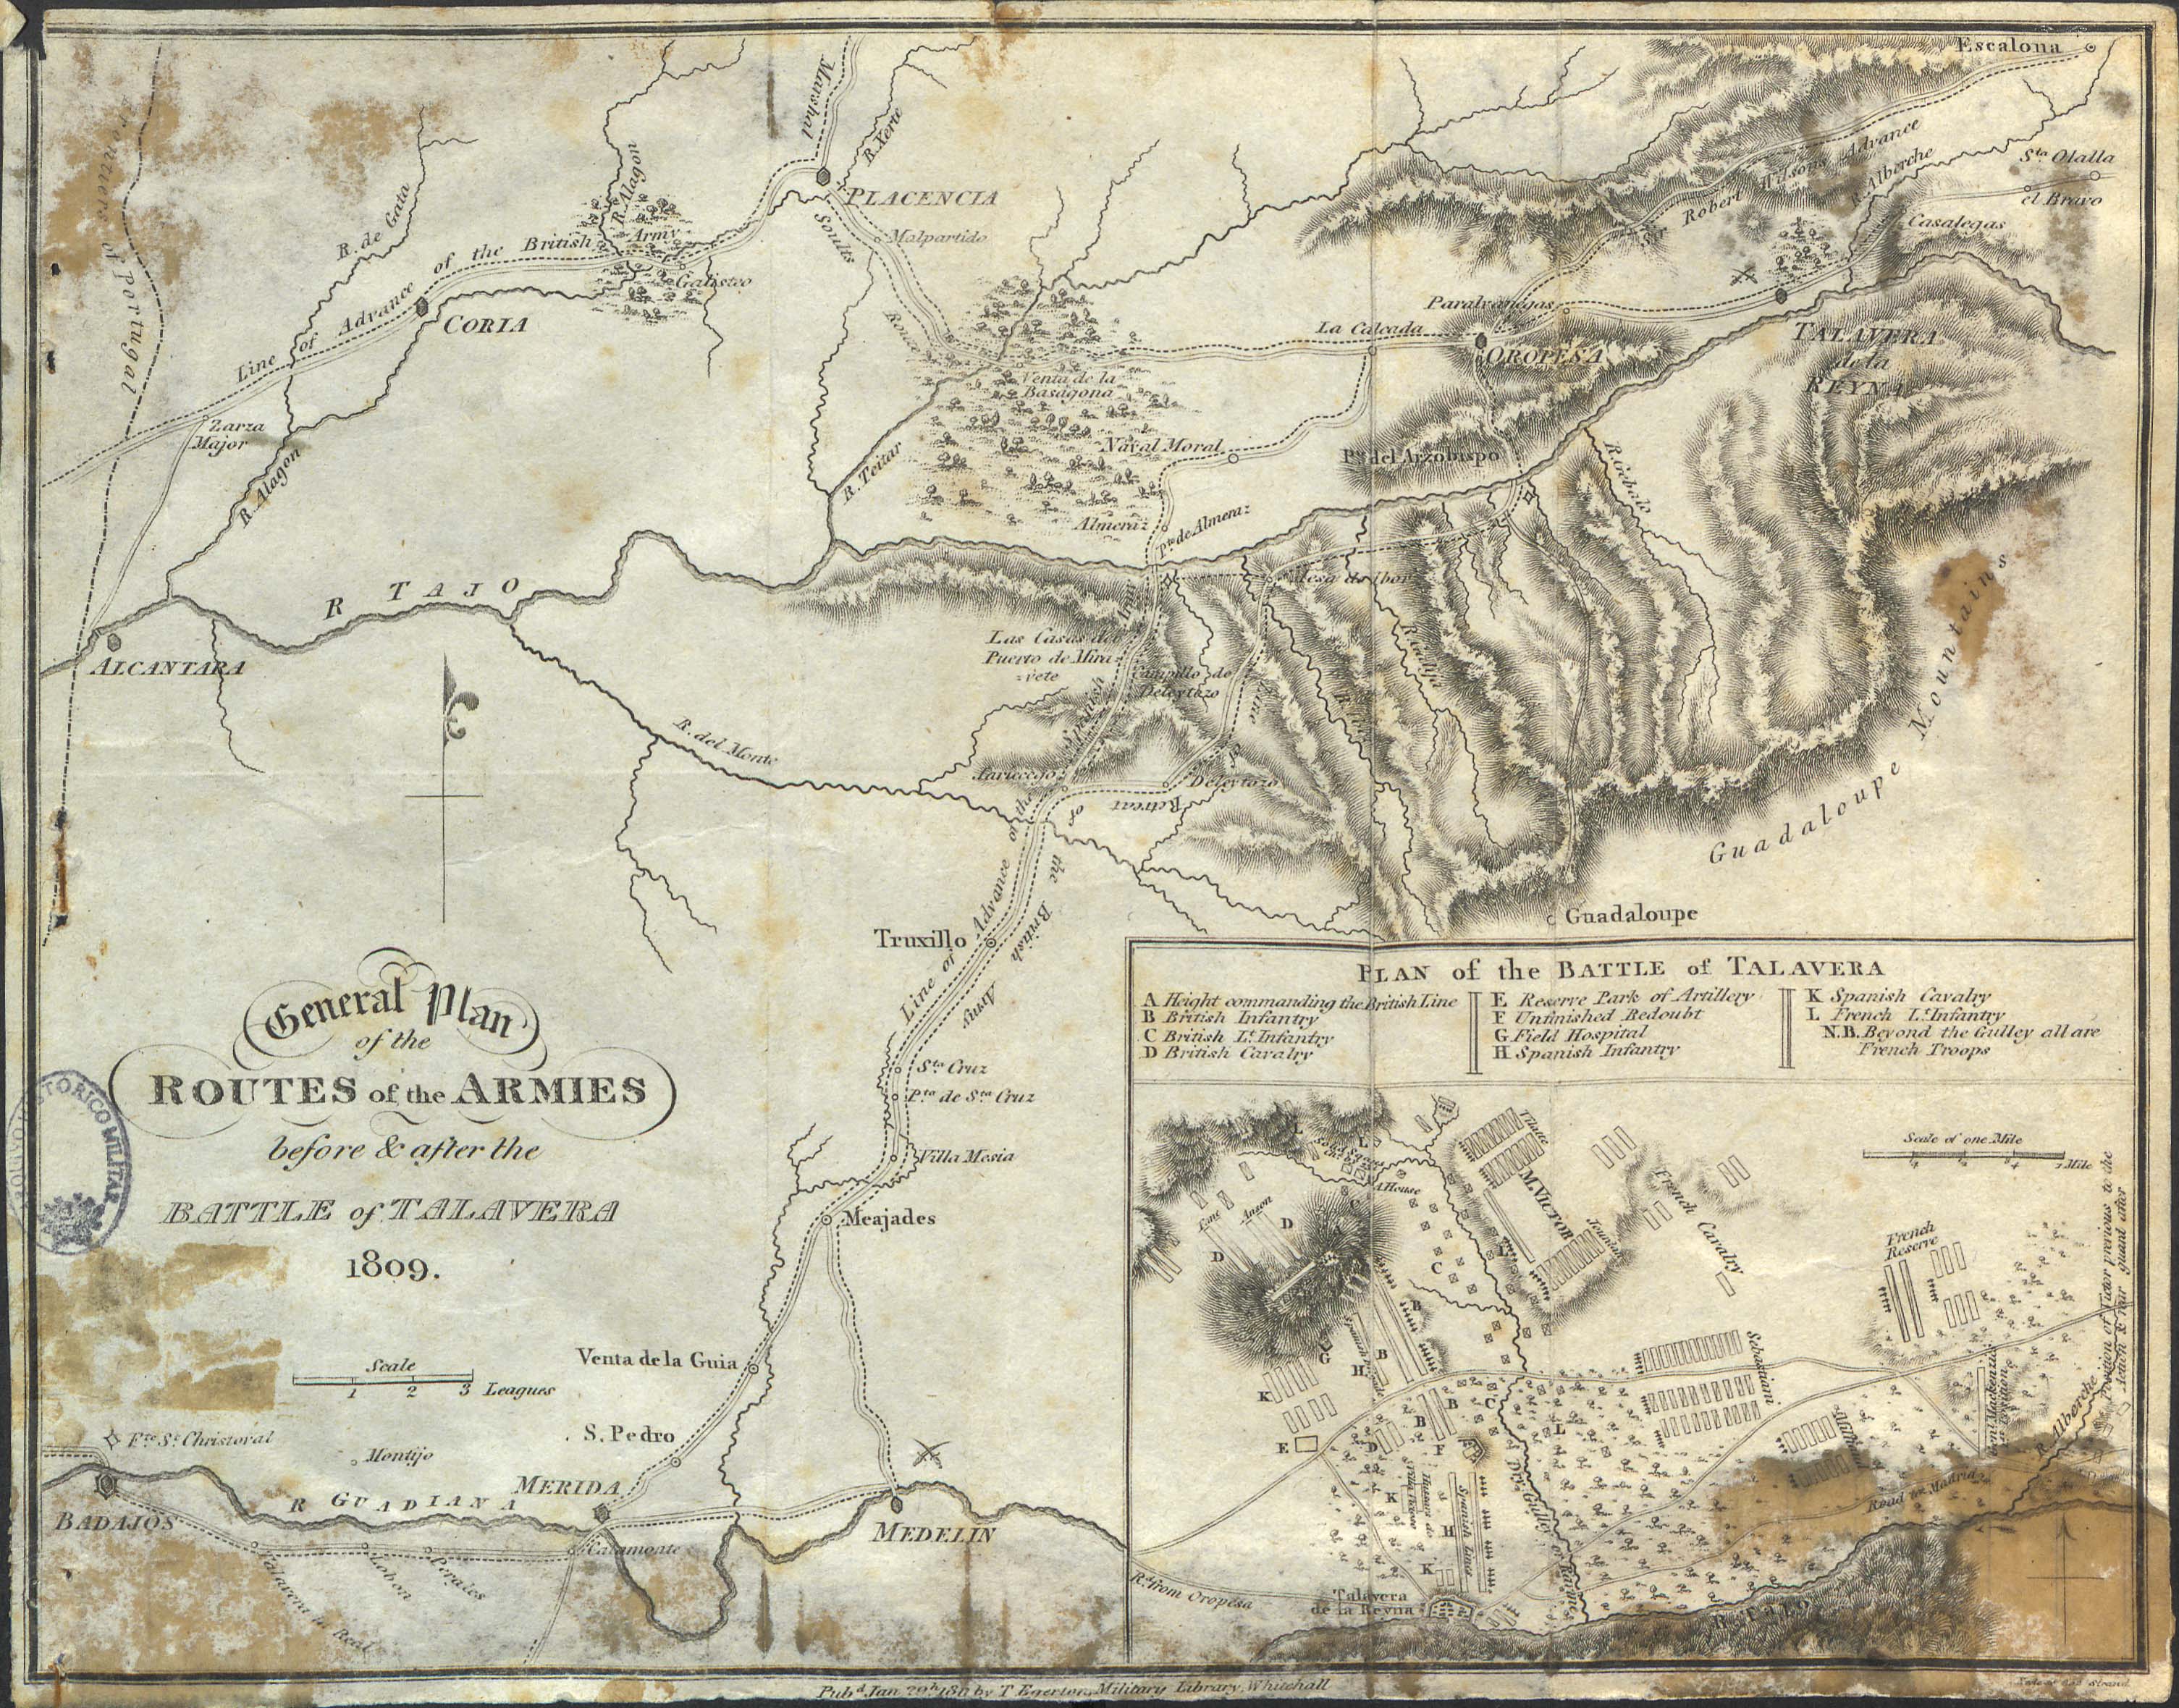 General Plan of the Routes of the Armies before & after the Battle of Talavera 1809